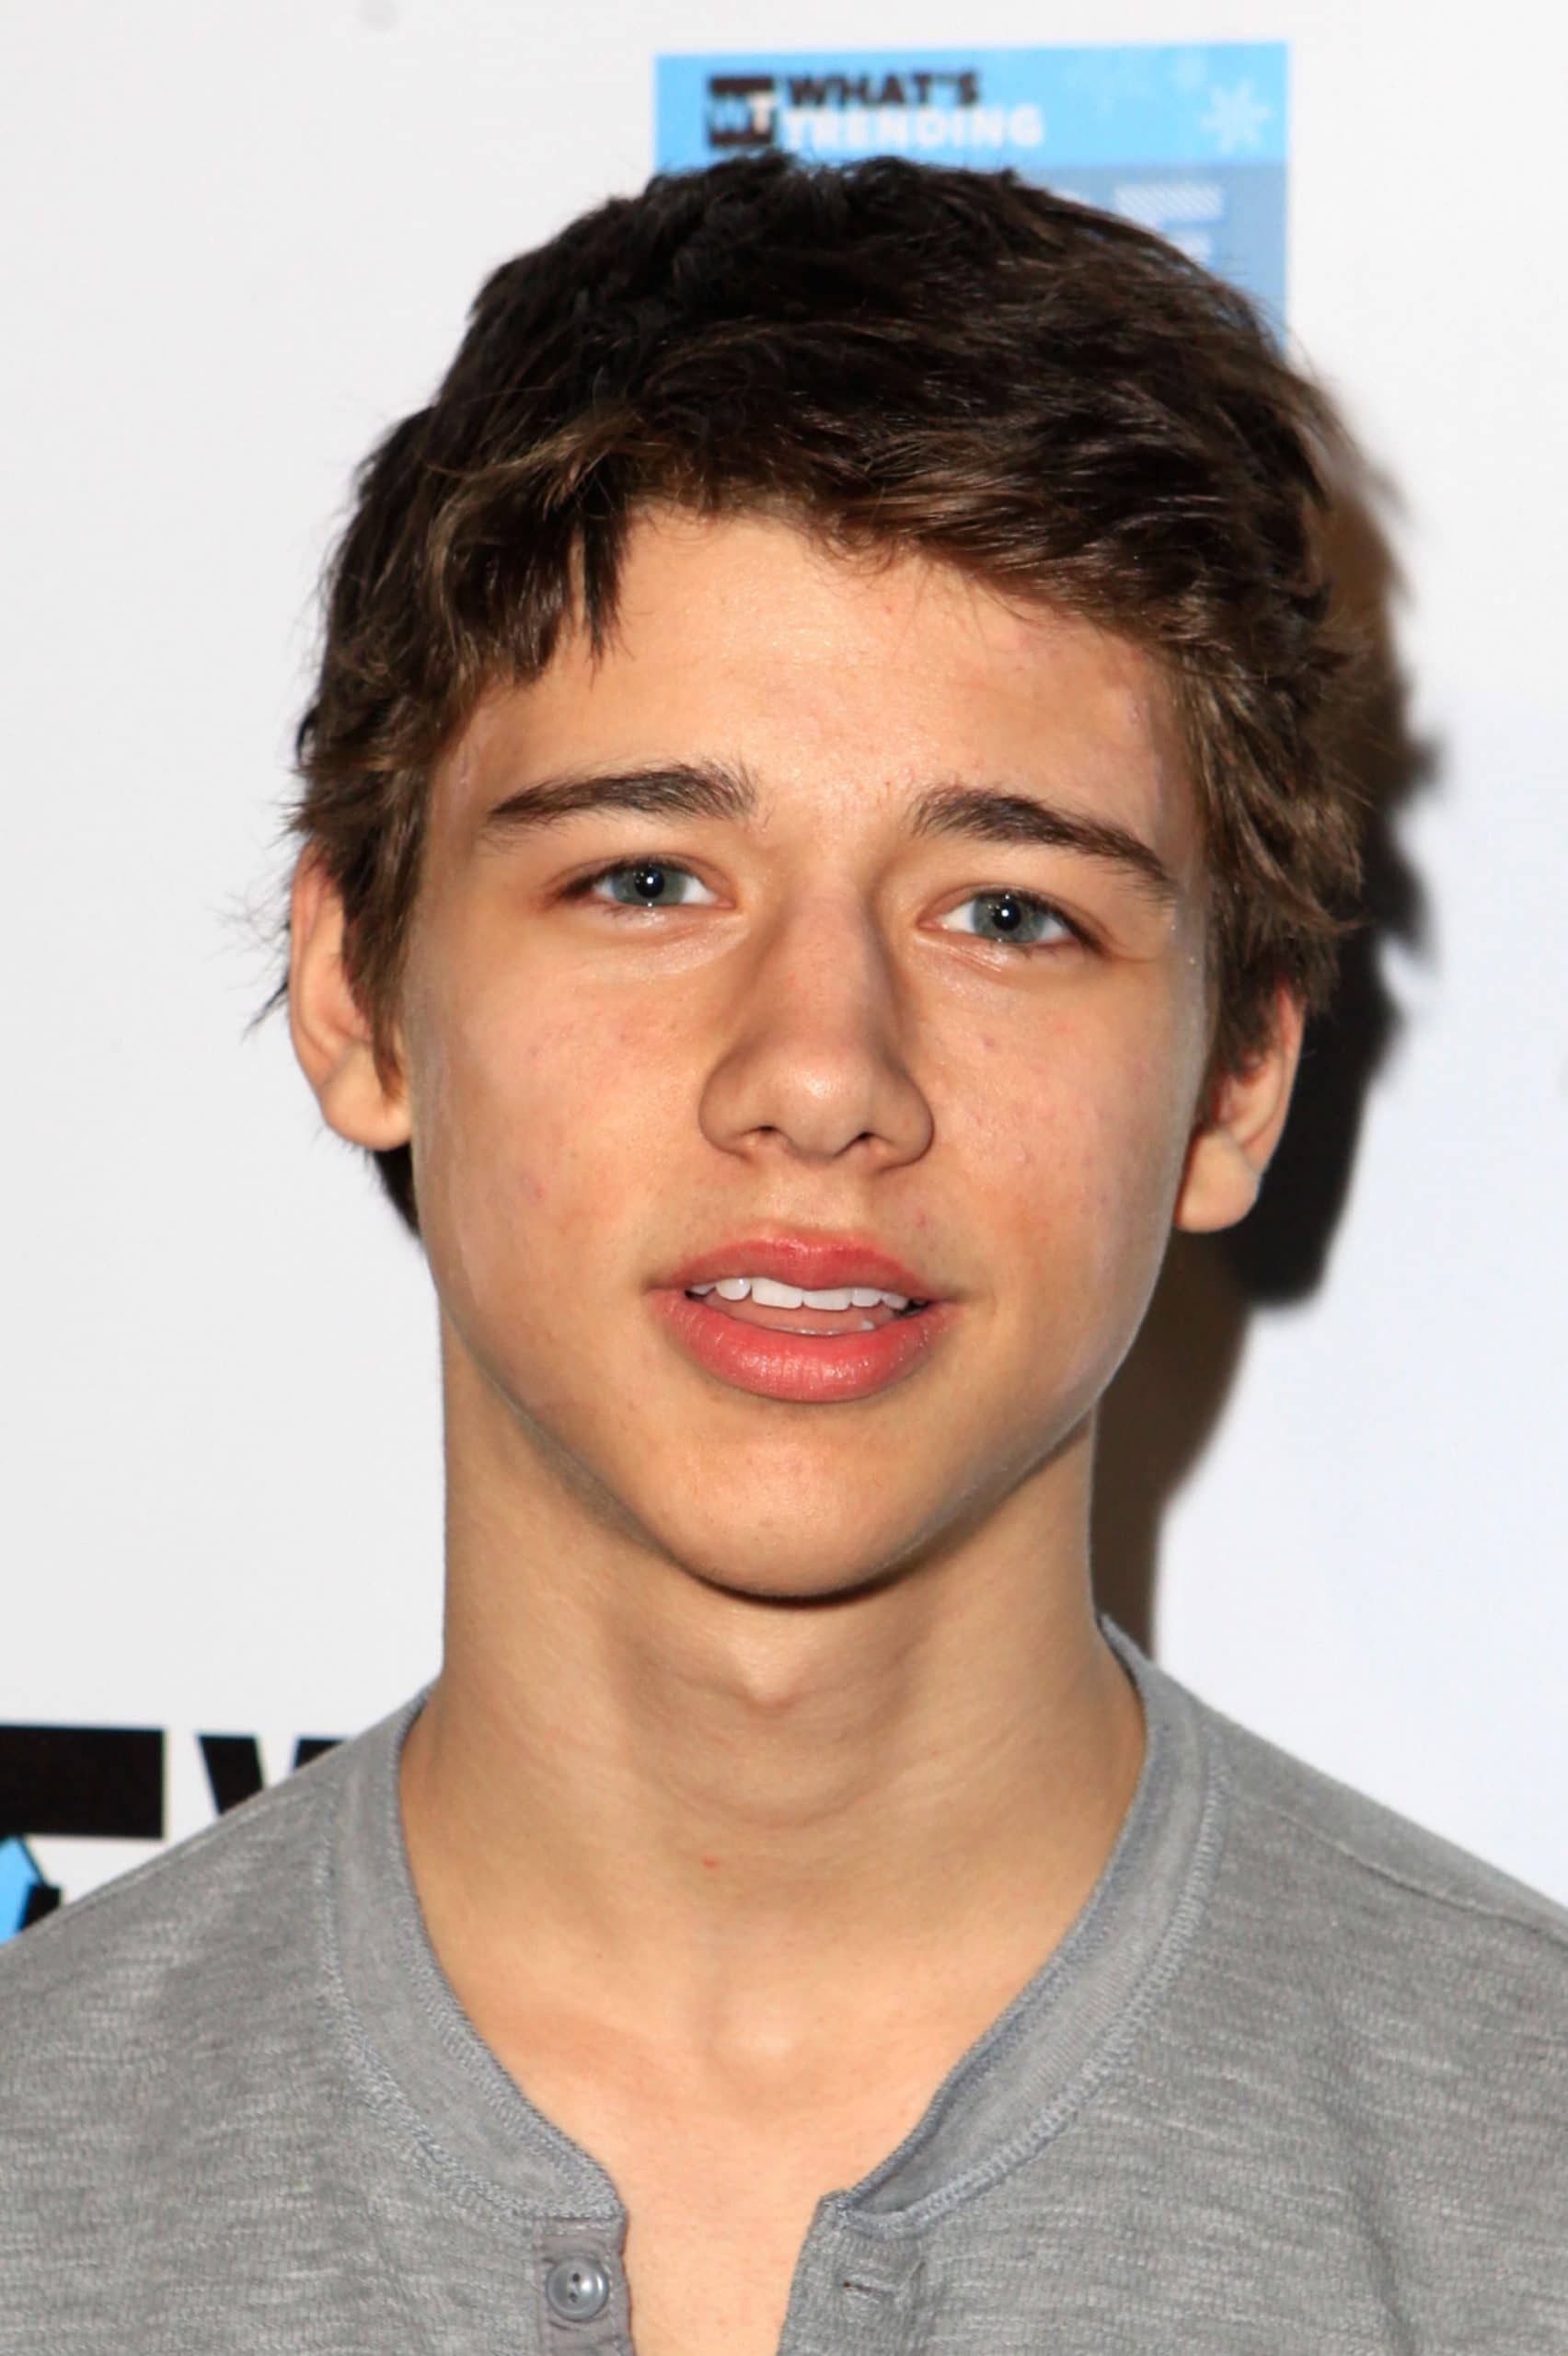 In 2019, Uriah Shelton was selected to appear in the recurring role of Long...